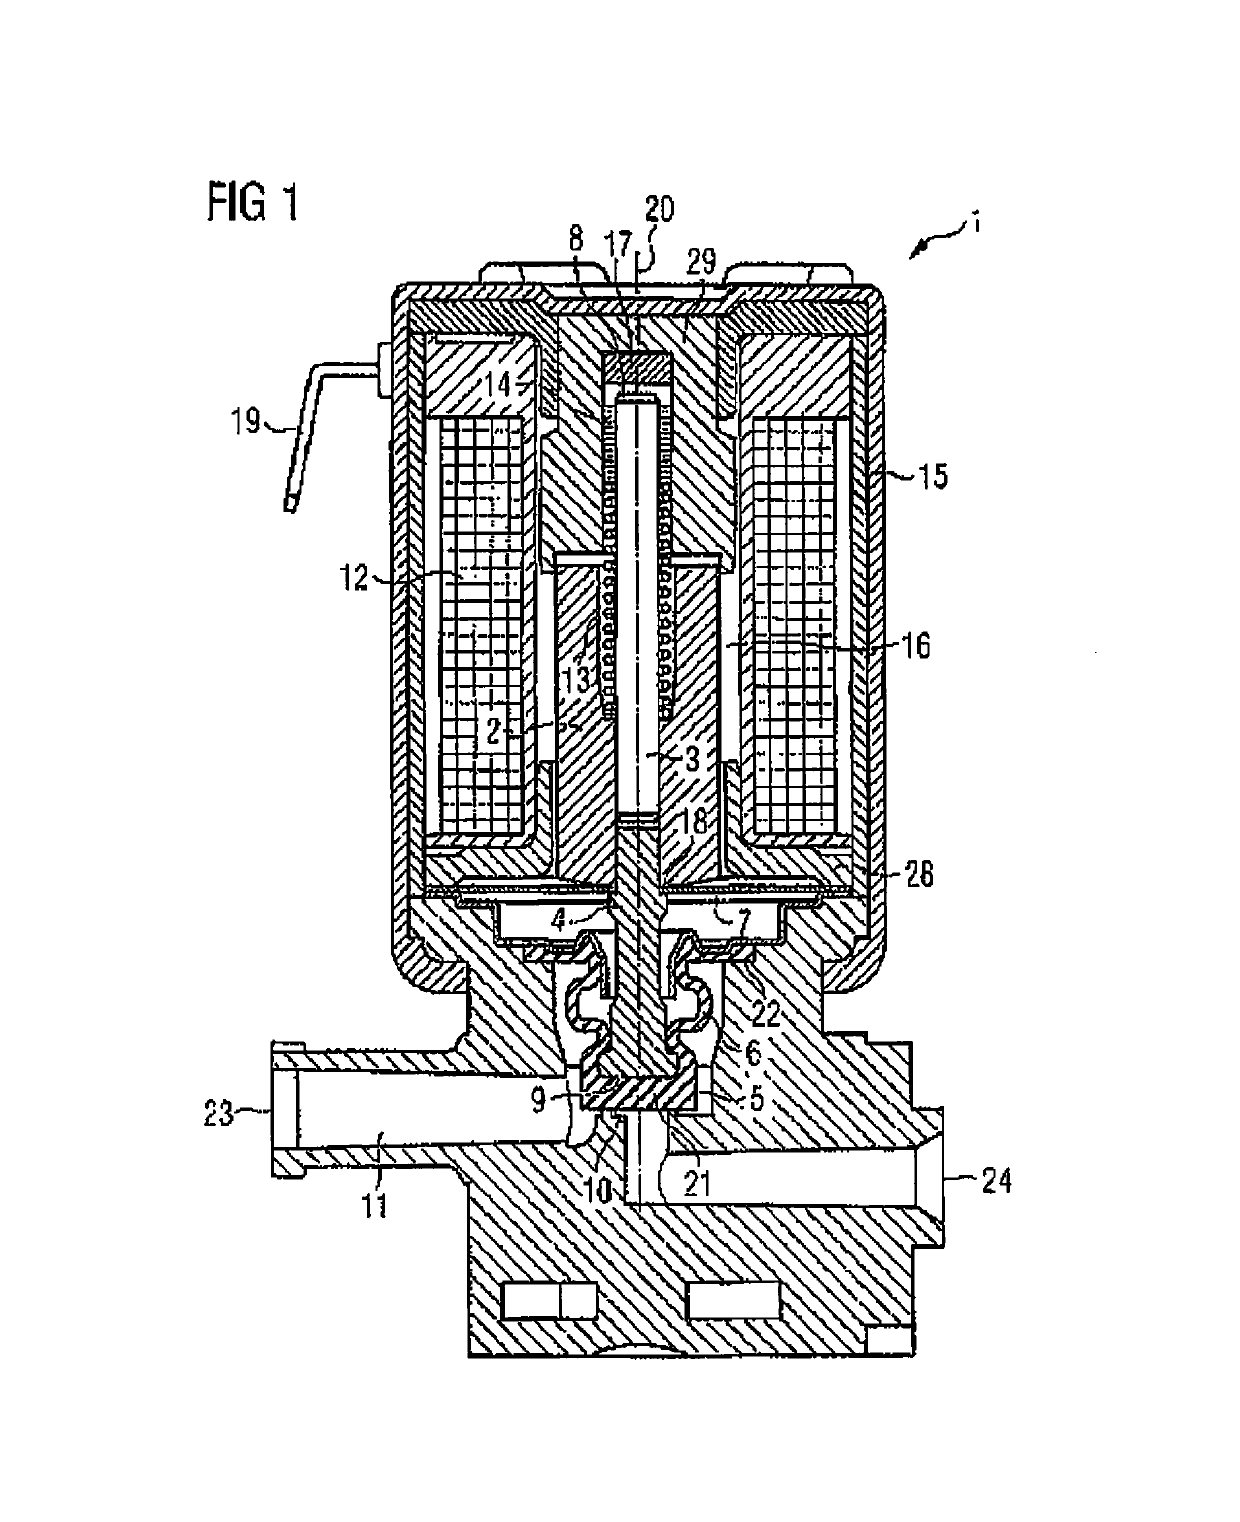 Electromagnetically operated valve